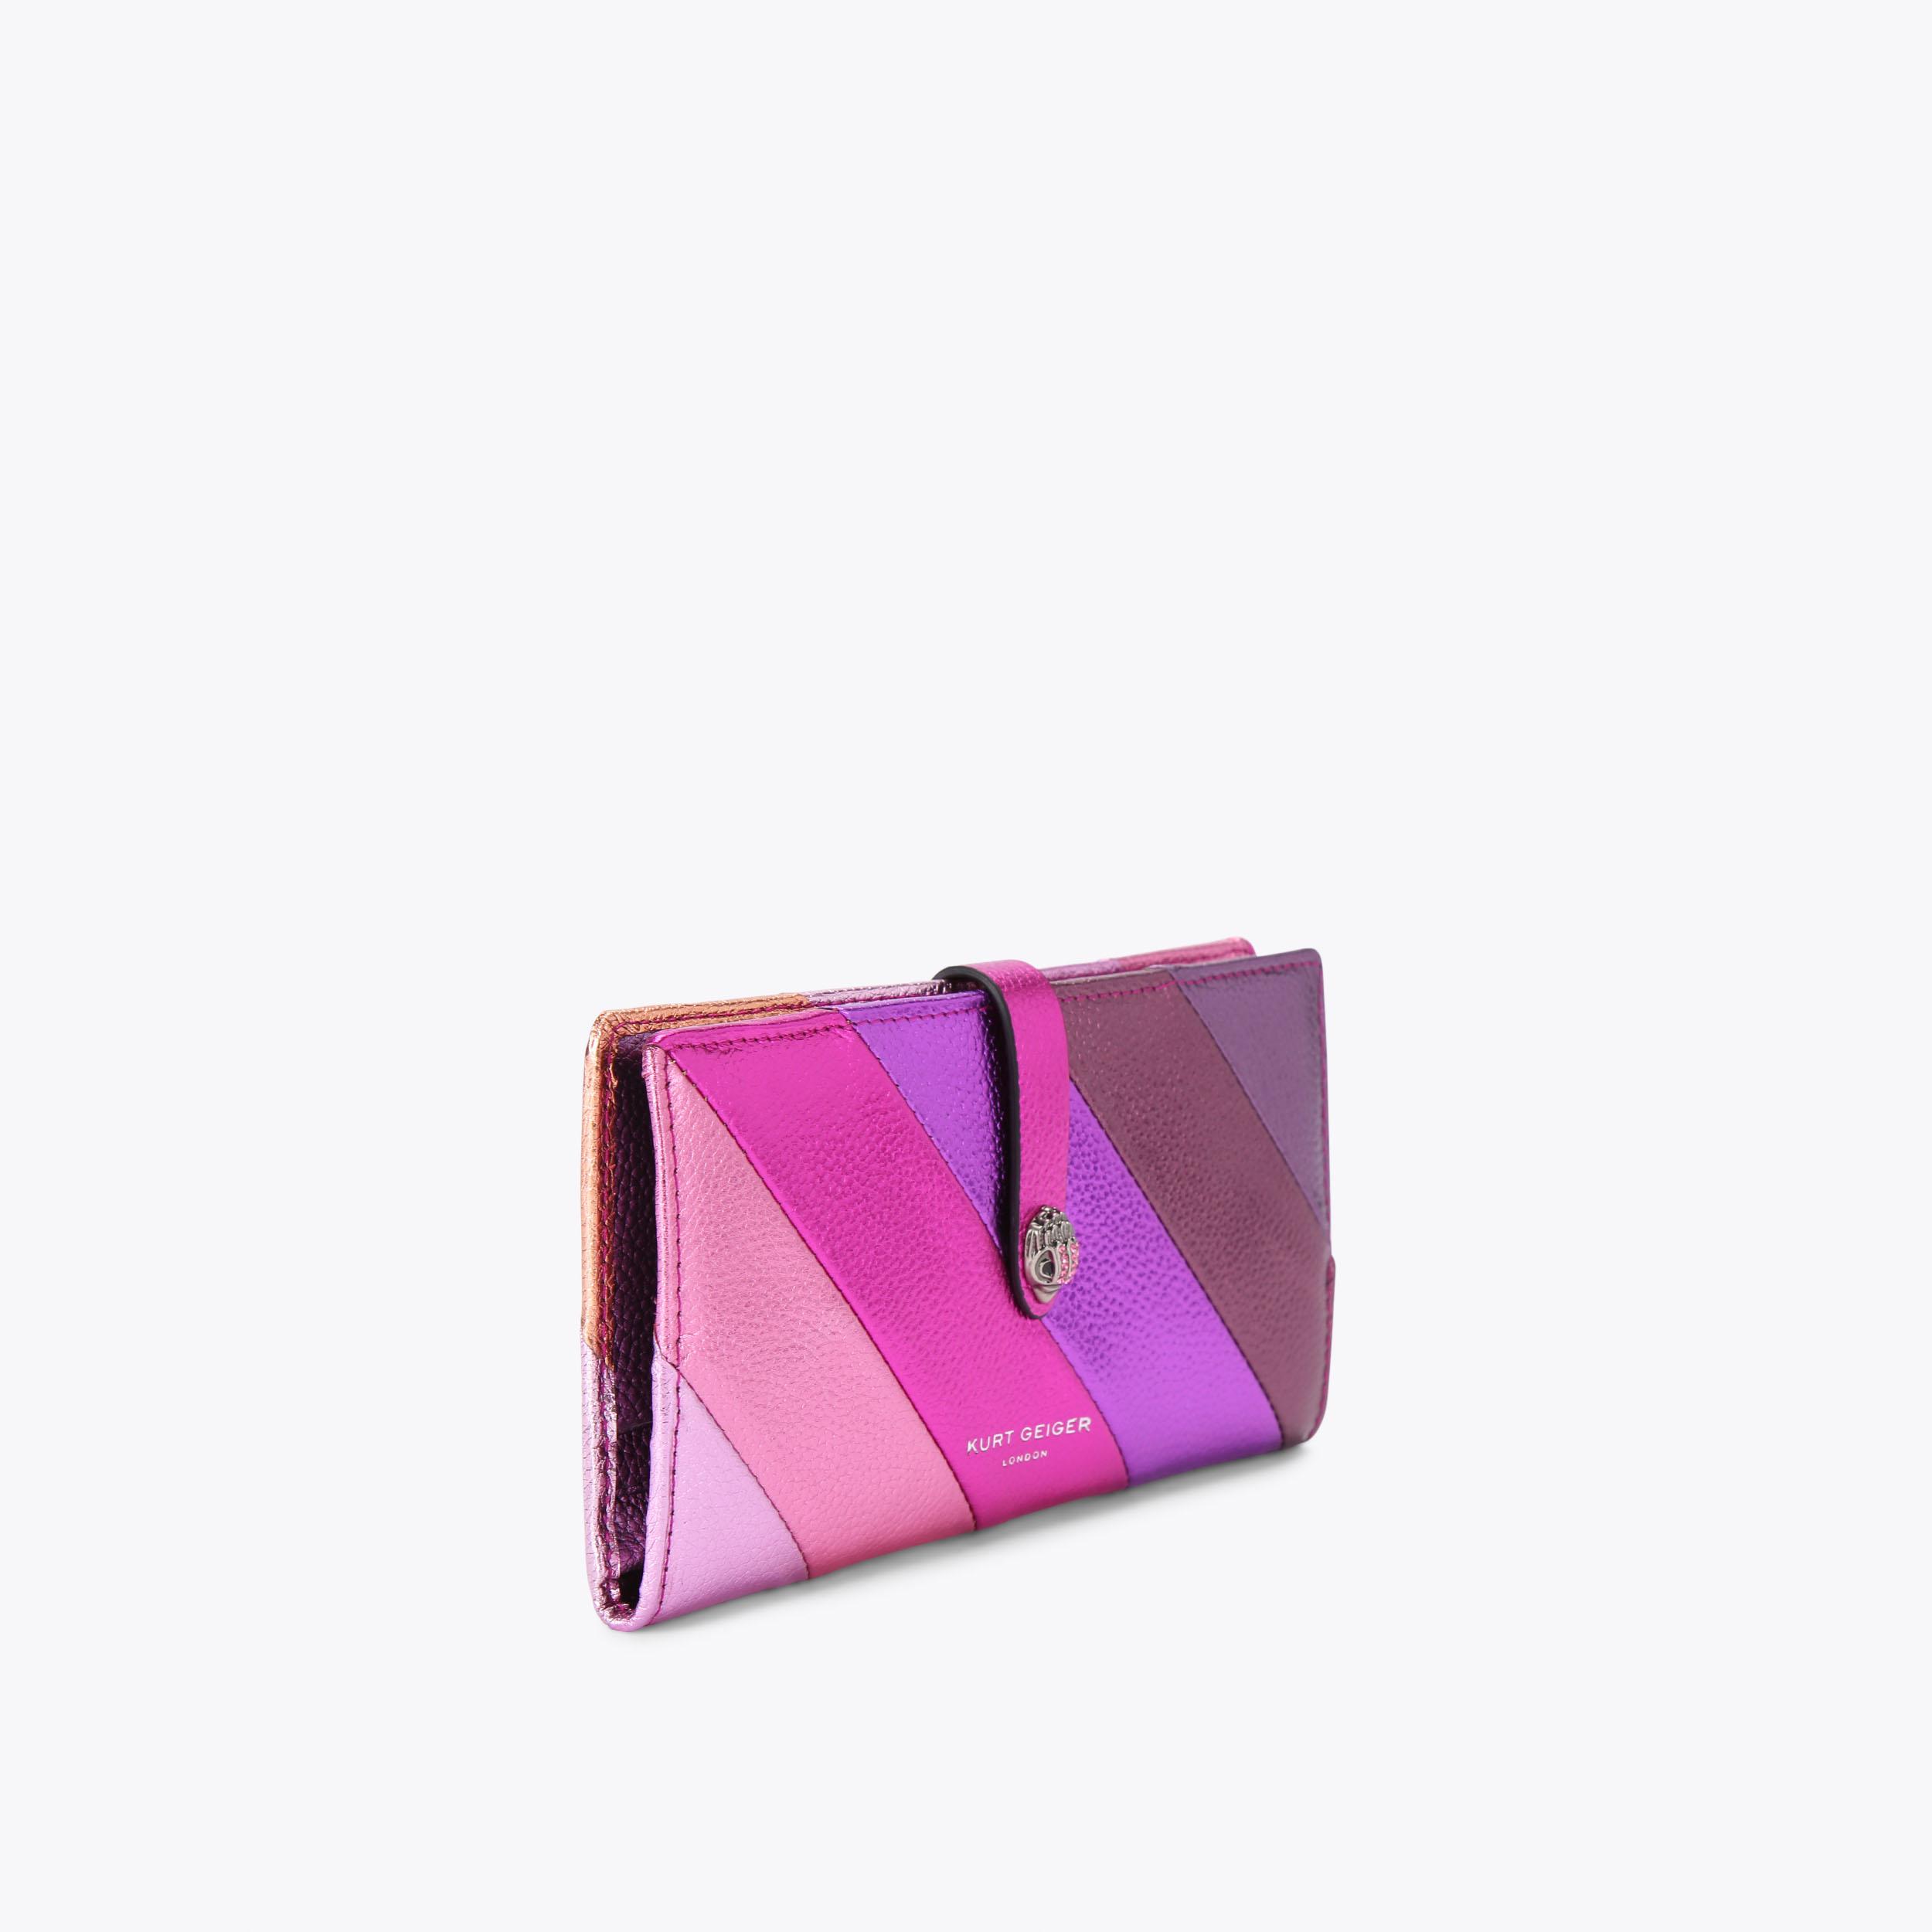 SOFT WALLET LEATHER Pink Leather Wallet by KURT GEIGER LONDON